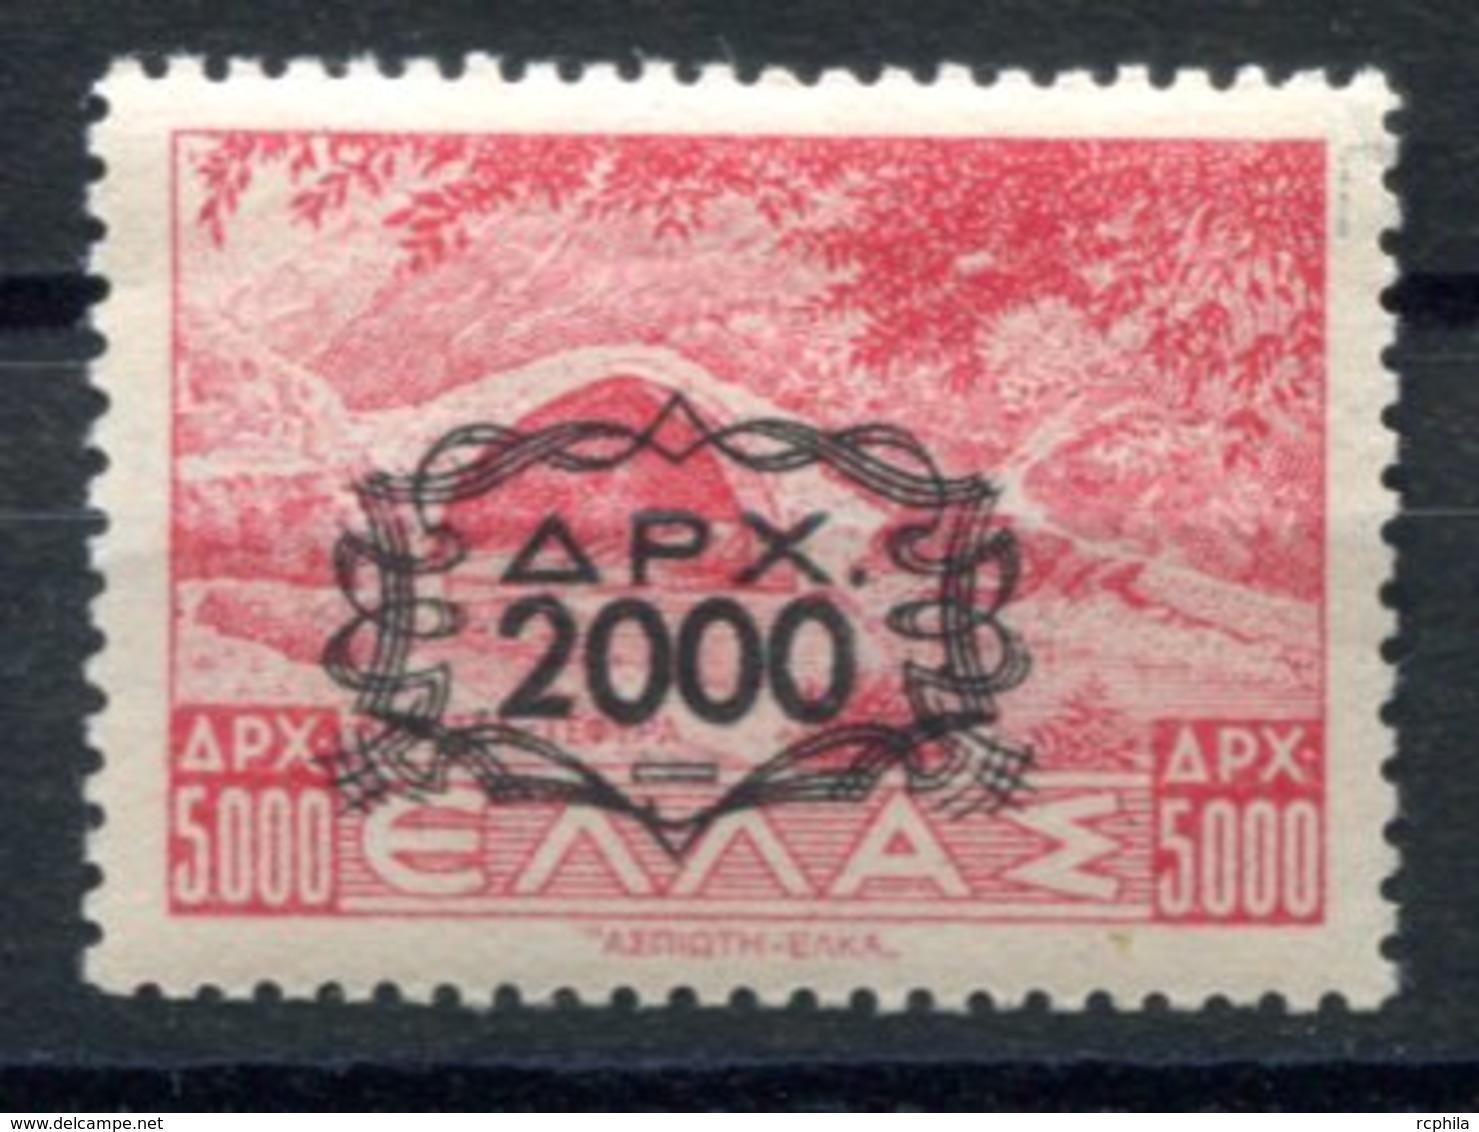 RC 17016 GRECE COTE 54€ N° 532 - 2000d SUR 5000d NEUF ** B/TB MNH VF (PETIT PLI D'ANGLE) - Unused Stamps